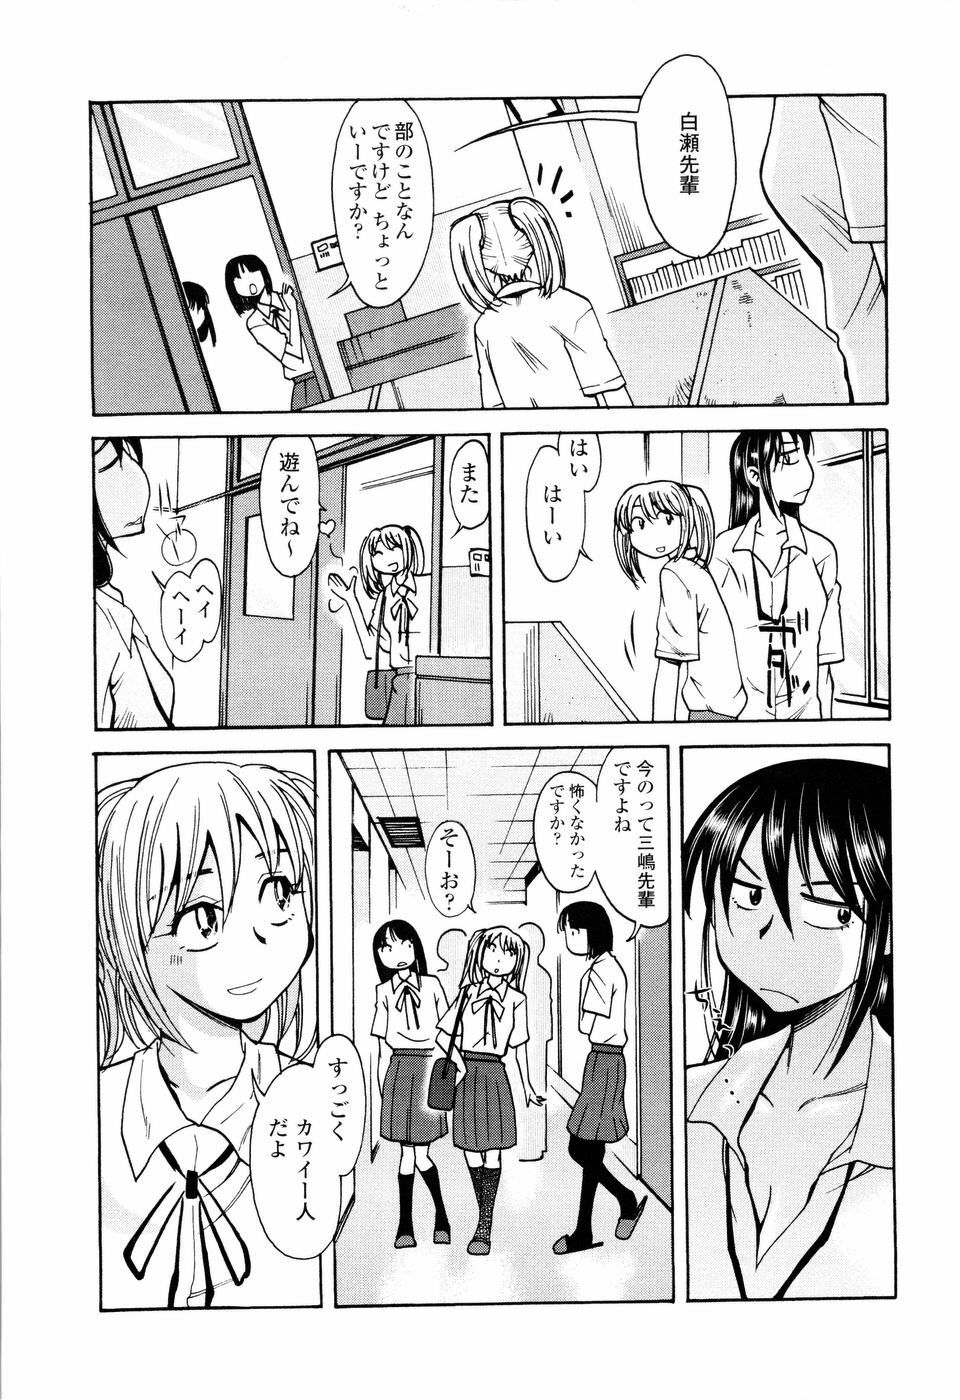 [Ono Kenuji] Love Dere - It is crazy about love. page 35 full